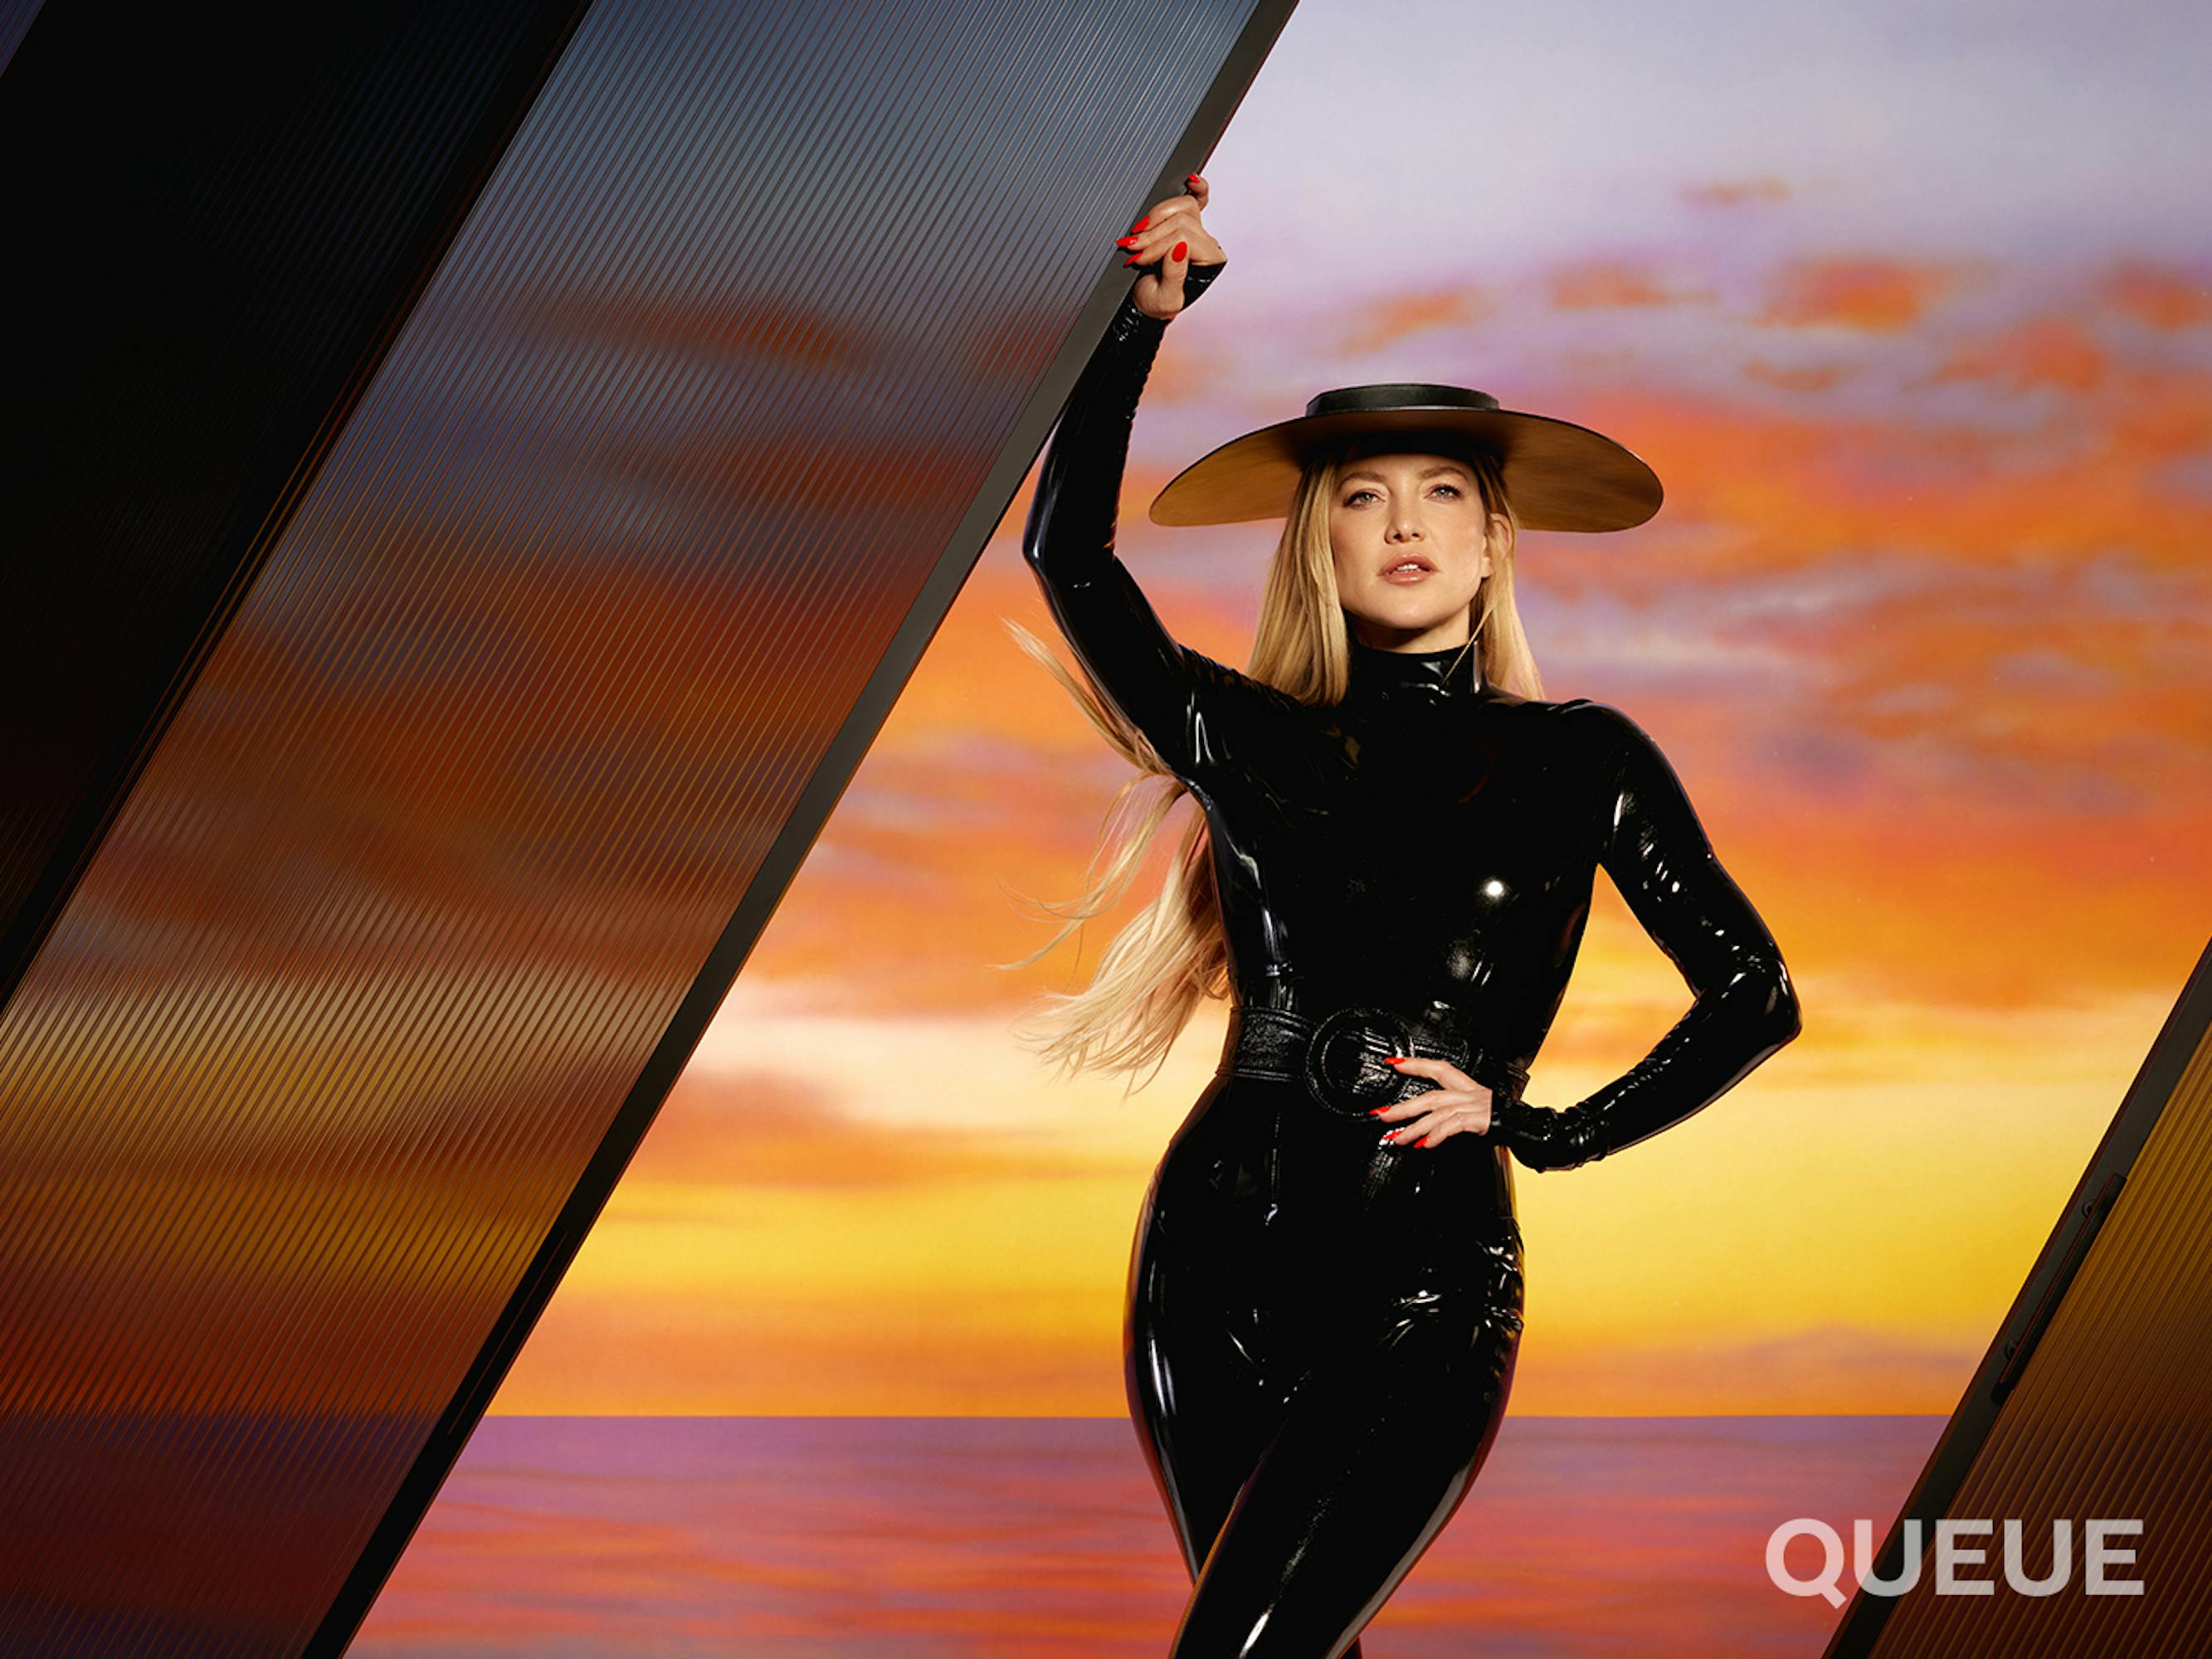 Kate Hudson wears a black latex suit and wide-brimmed hat against an orange and pink sunset. 